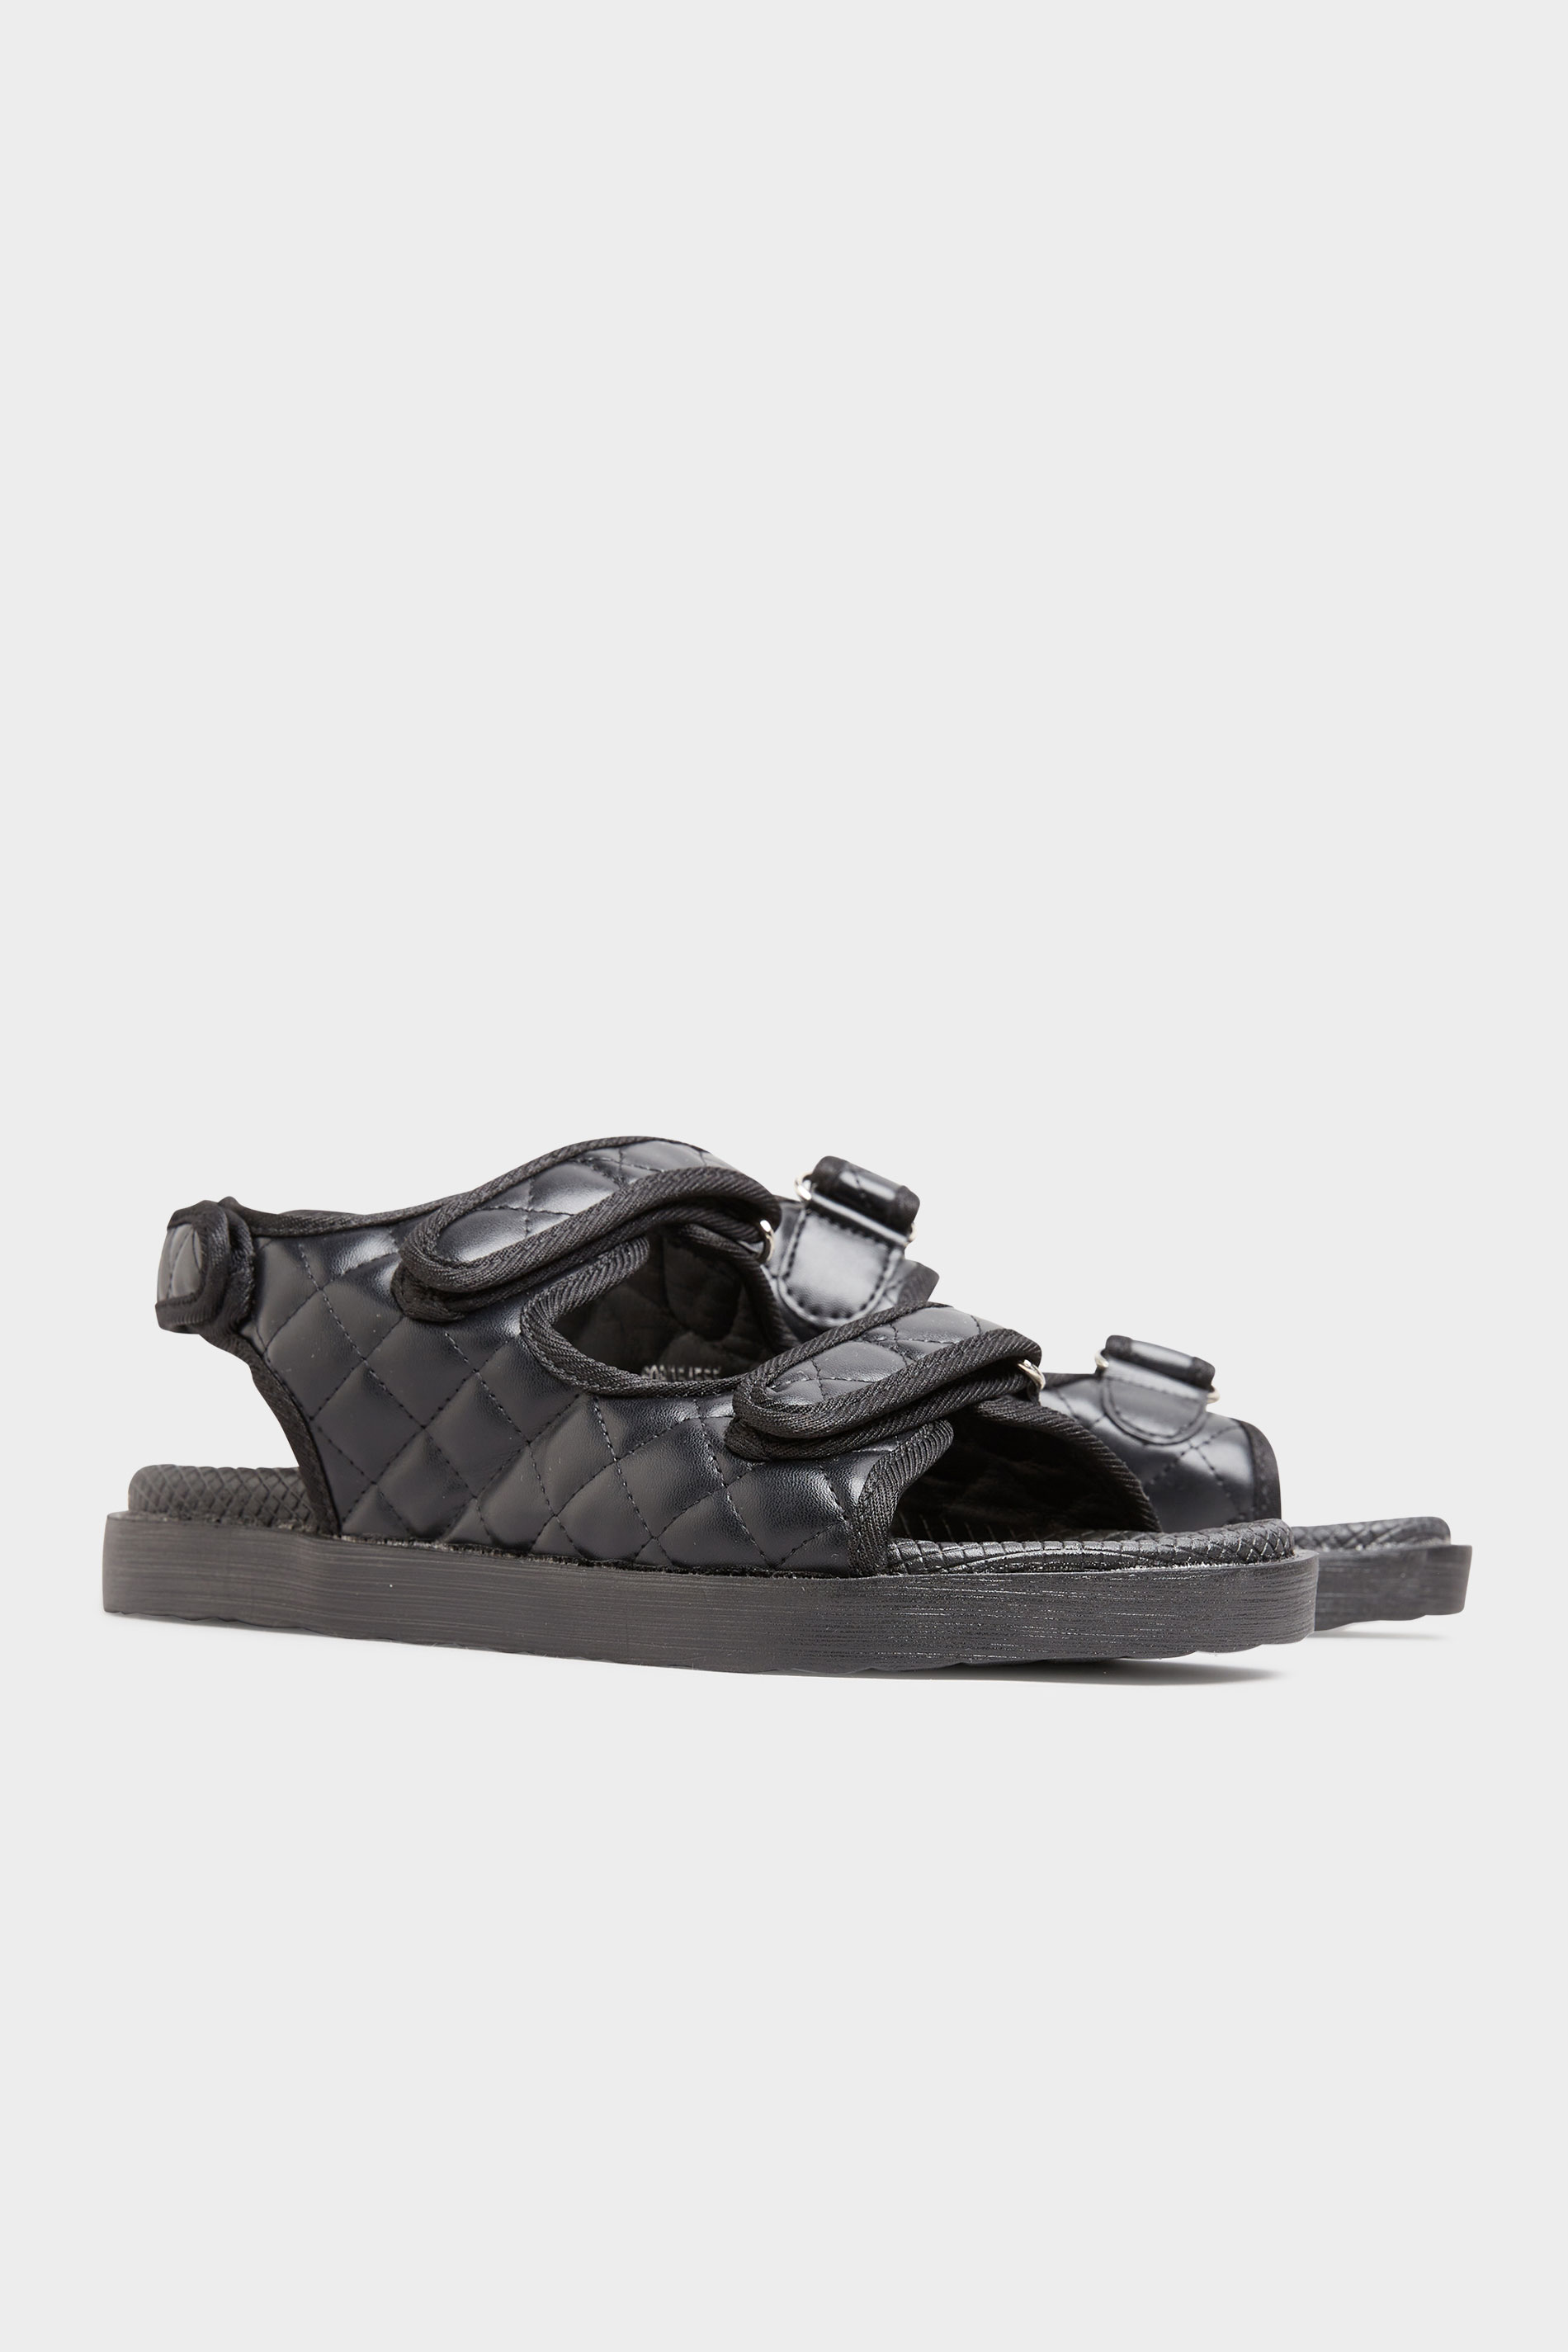 Black Quilted Velcro Sandal in Extra Wide EEE Fit_E.jpg